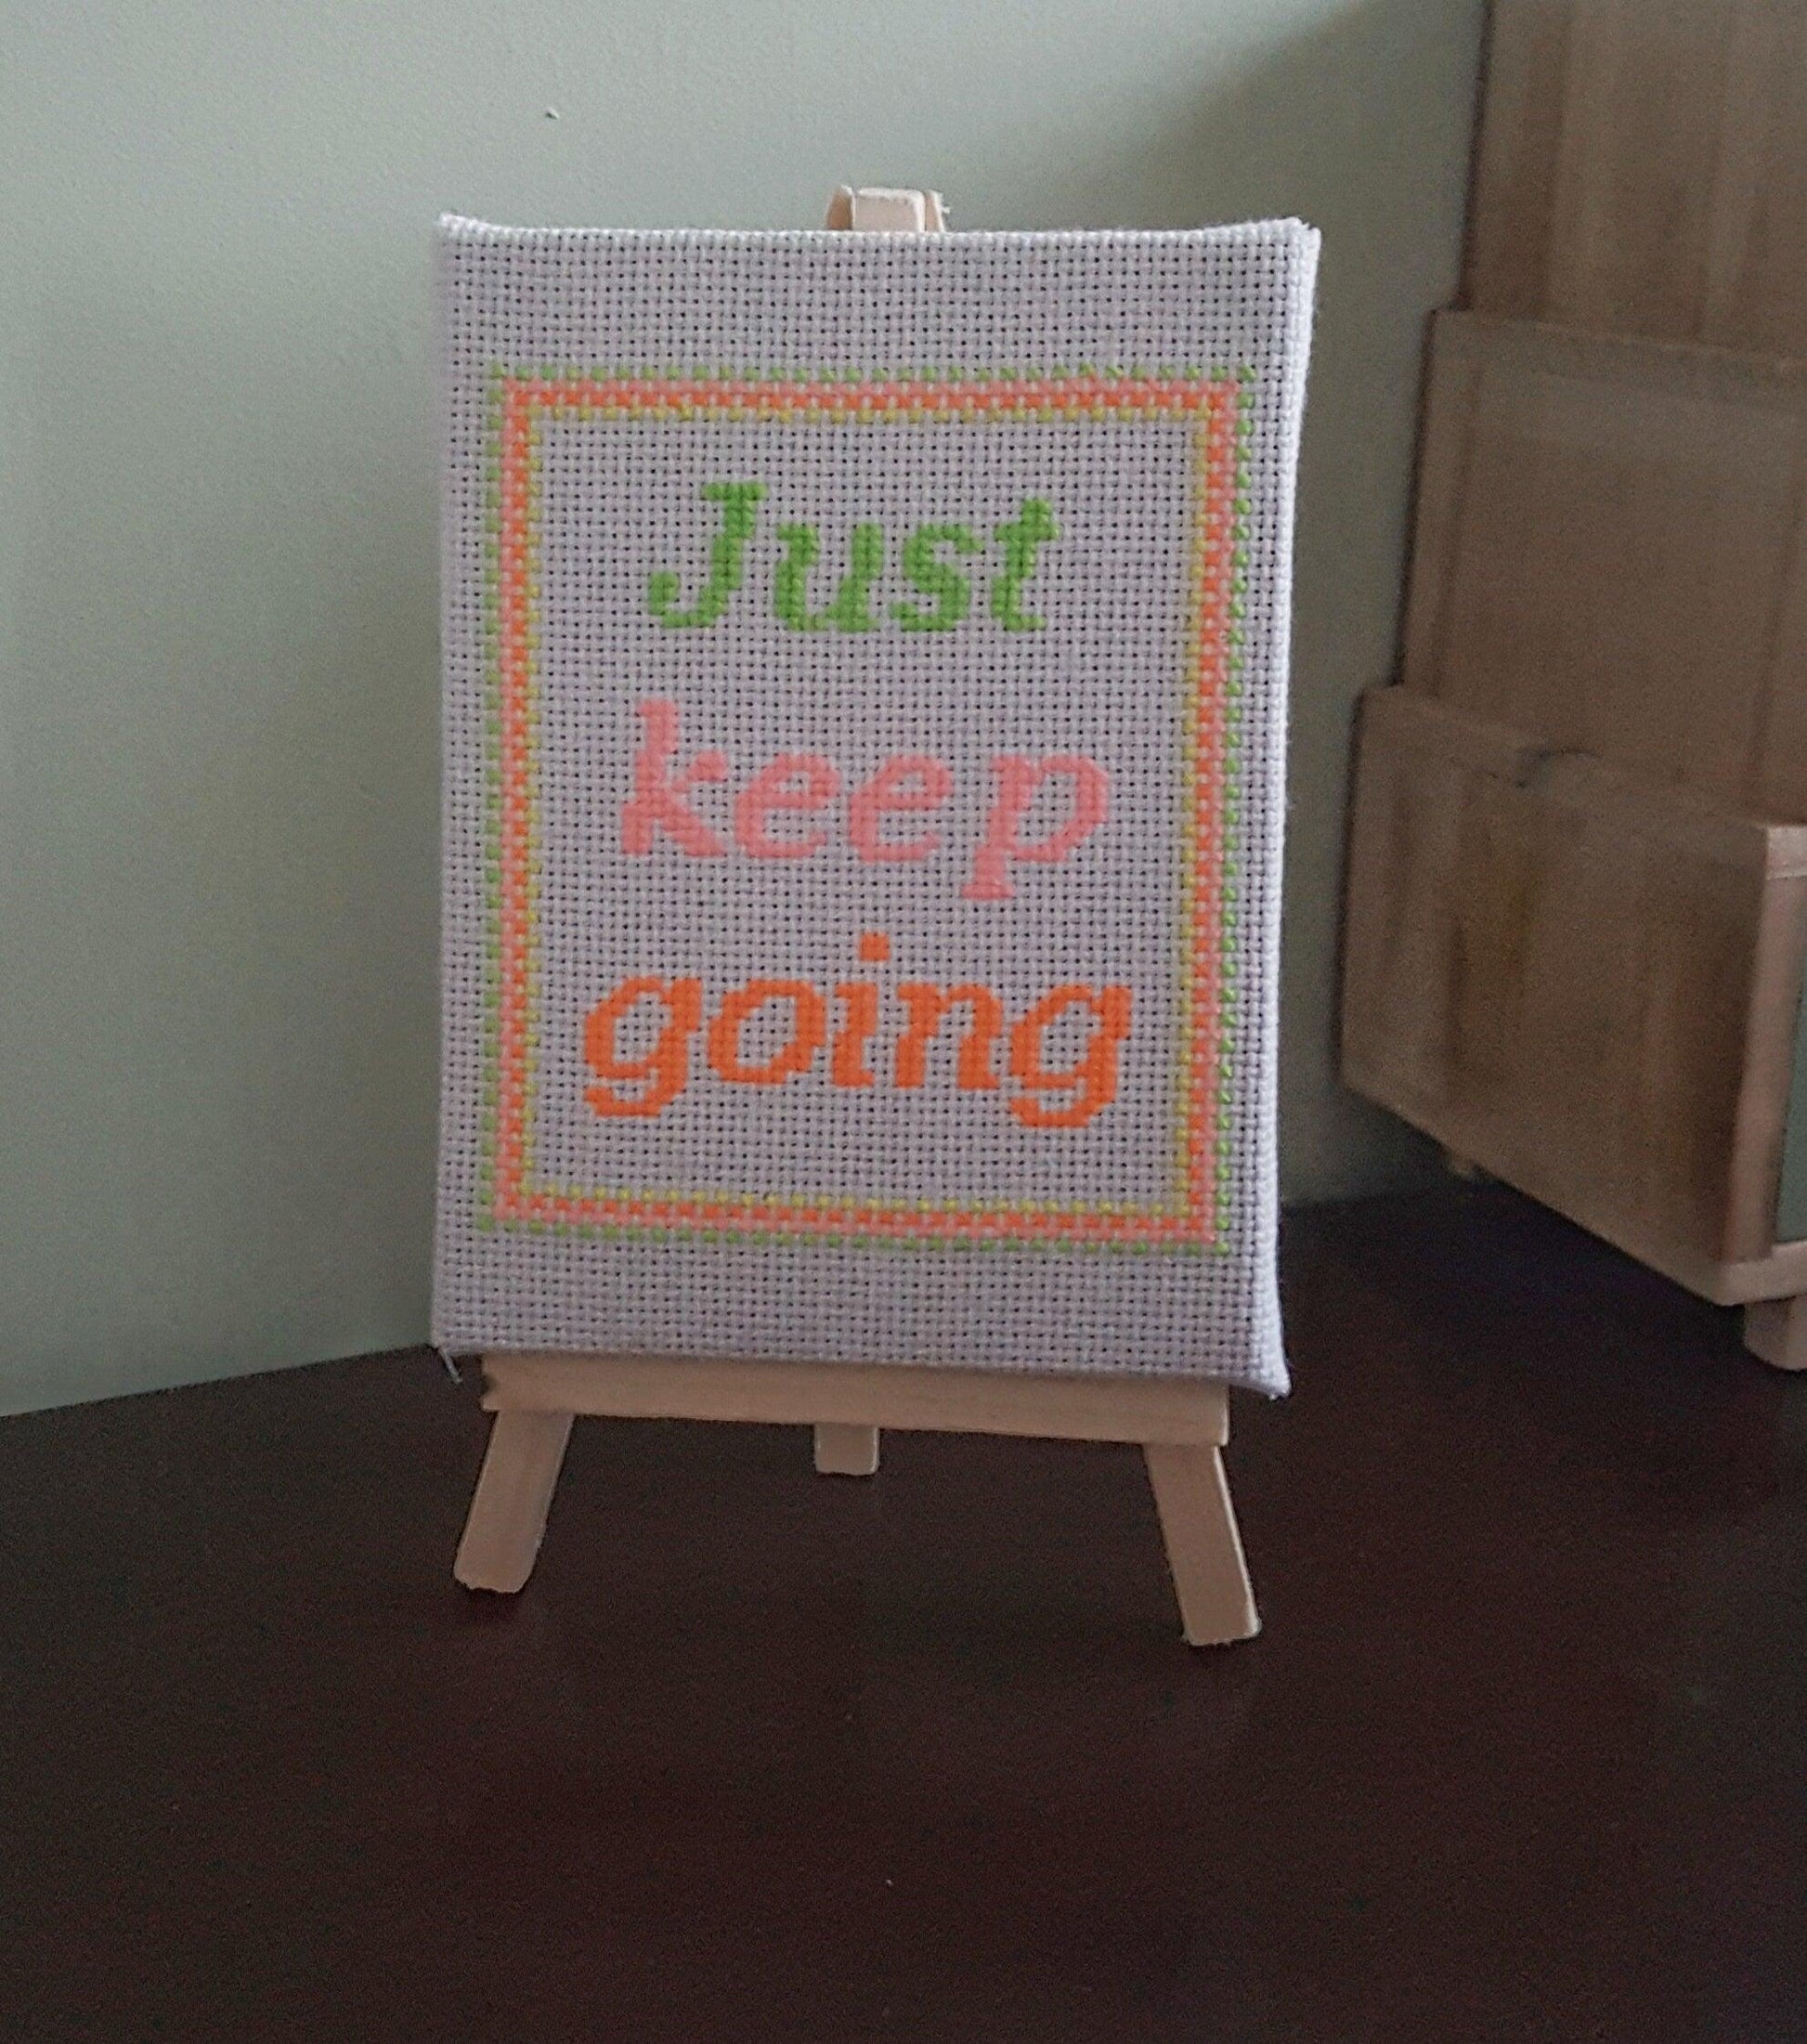 Just keep going, completed cross stitch quote - Thistleflat Crafts